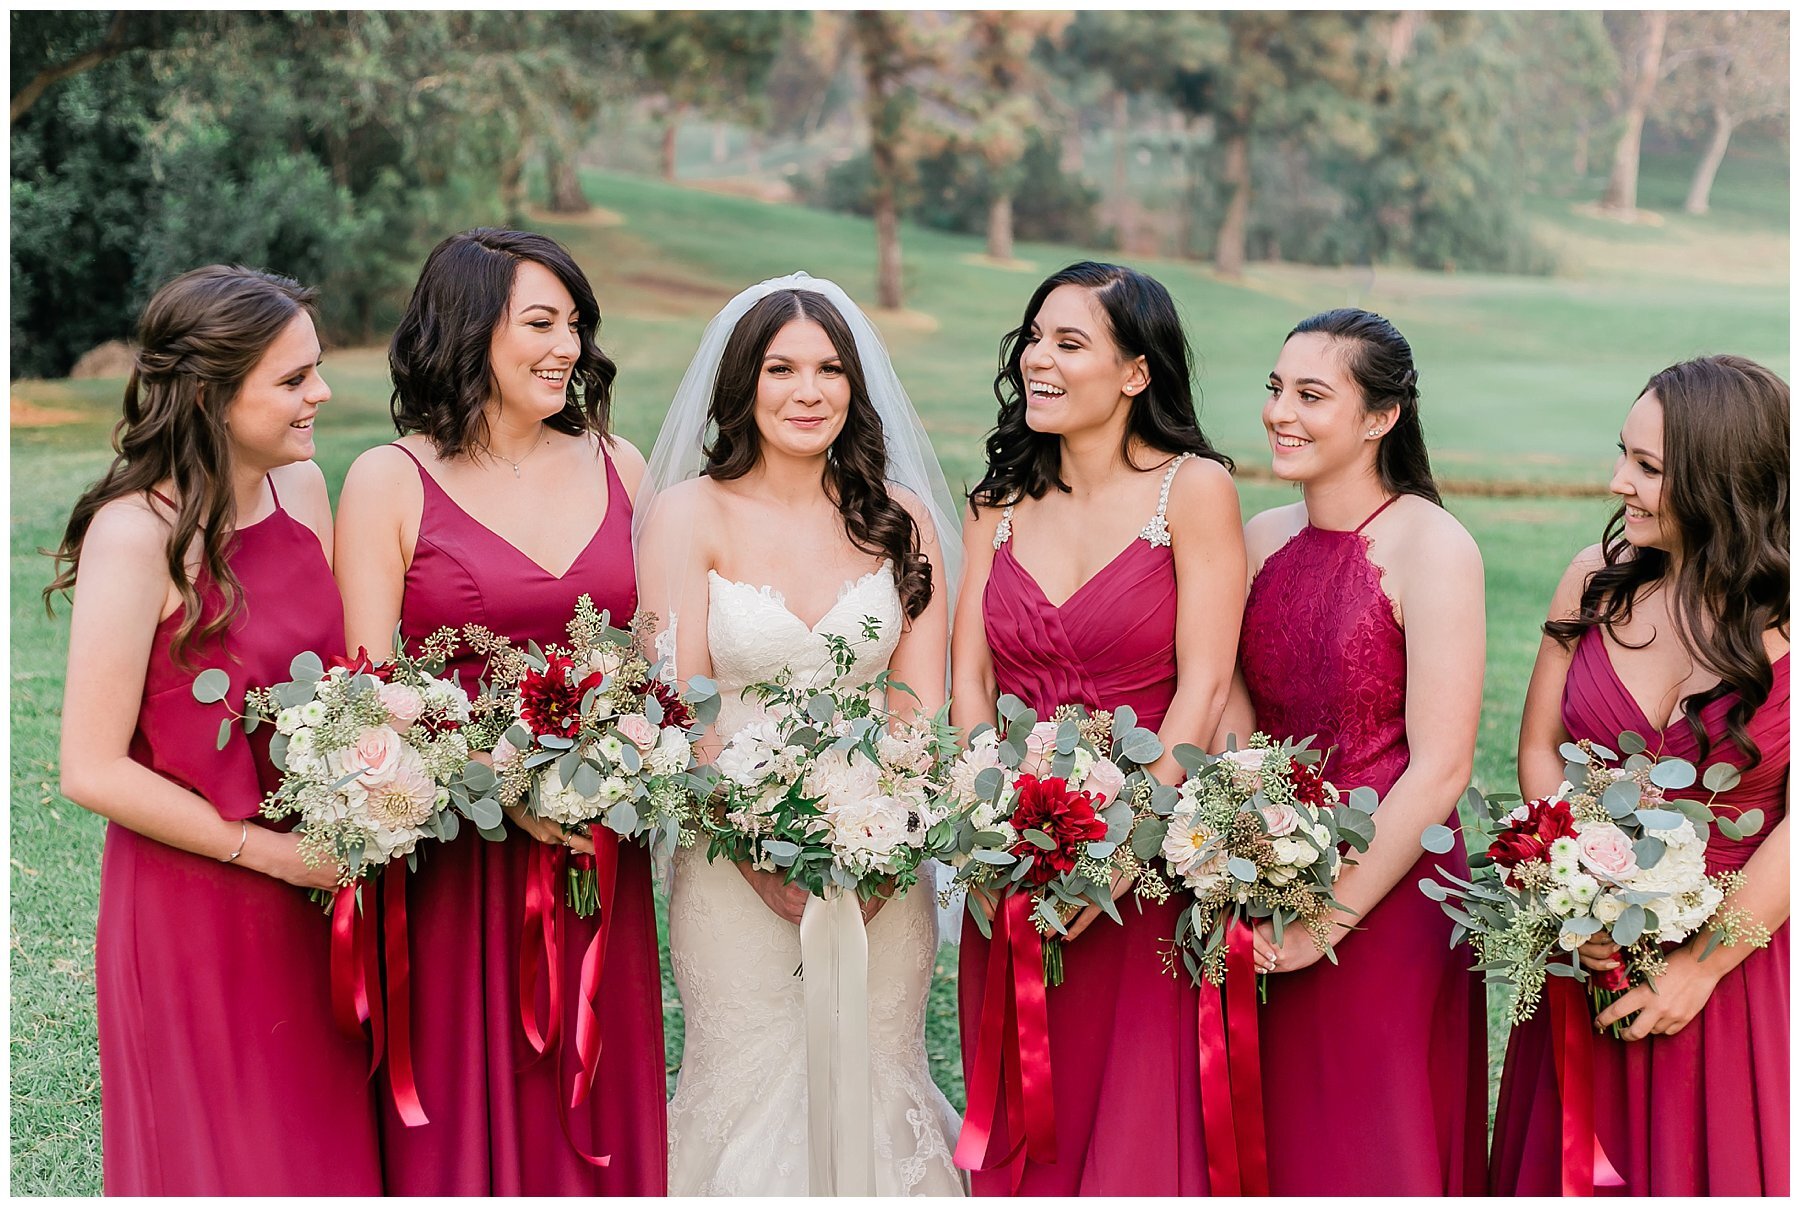  bride and bridesmaids laughing together on the golf course 